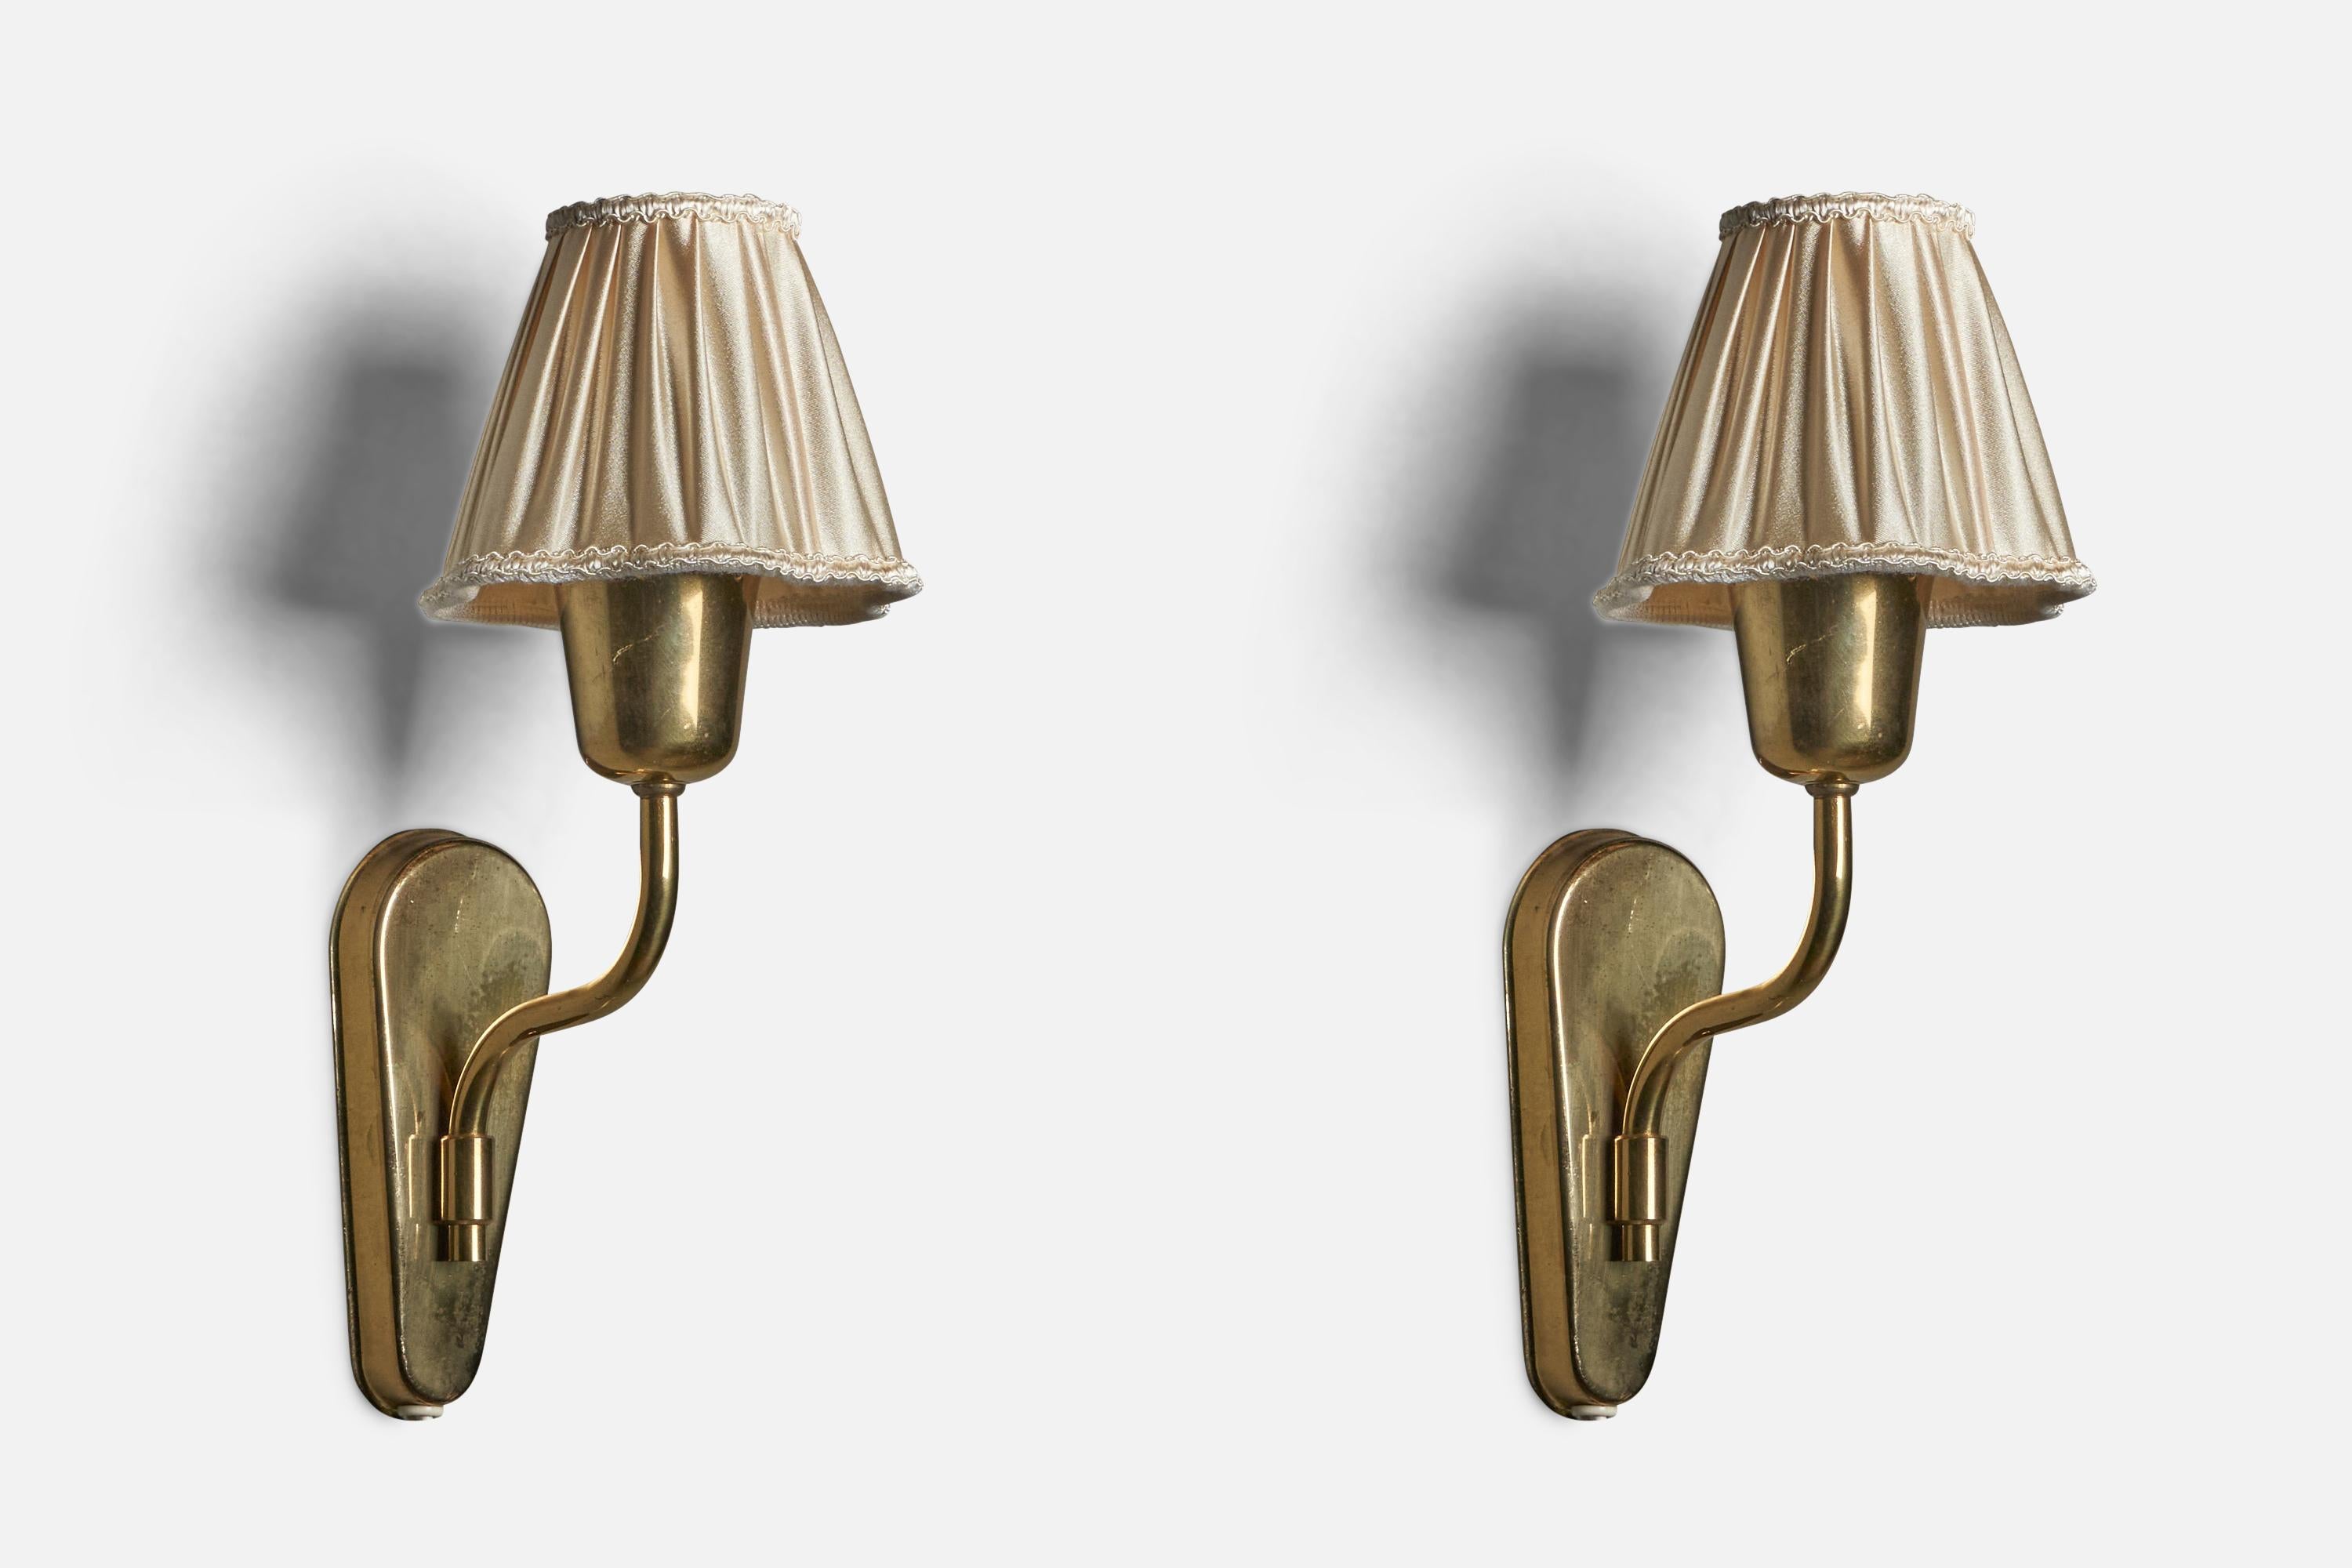 A pair of wall lights designed and produced by Fog & Mørup, Denmark, c. 1950s.

Overall Dimensions (inches): 12” H x 5.25” W x 6.25” D
Bulb Specifications: E-14 Bulb
Number of Sockets: 1